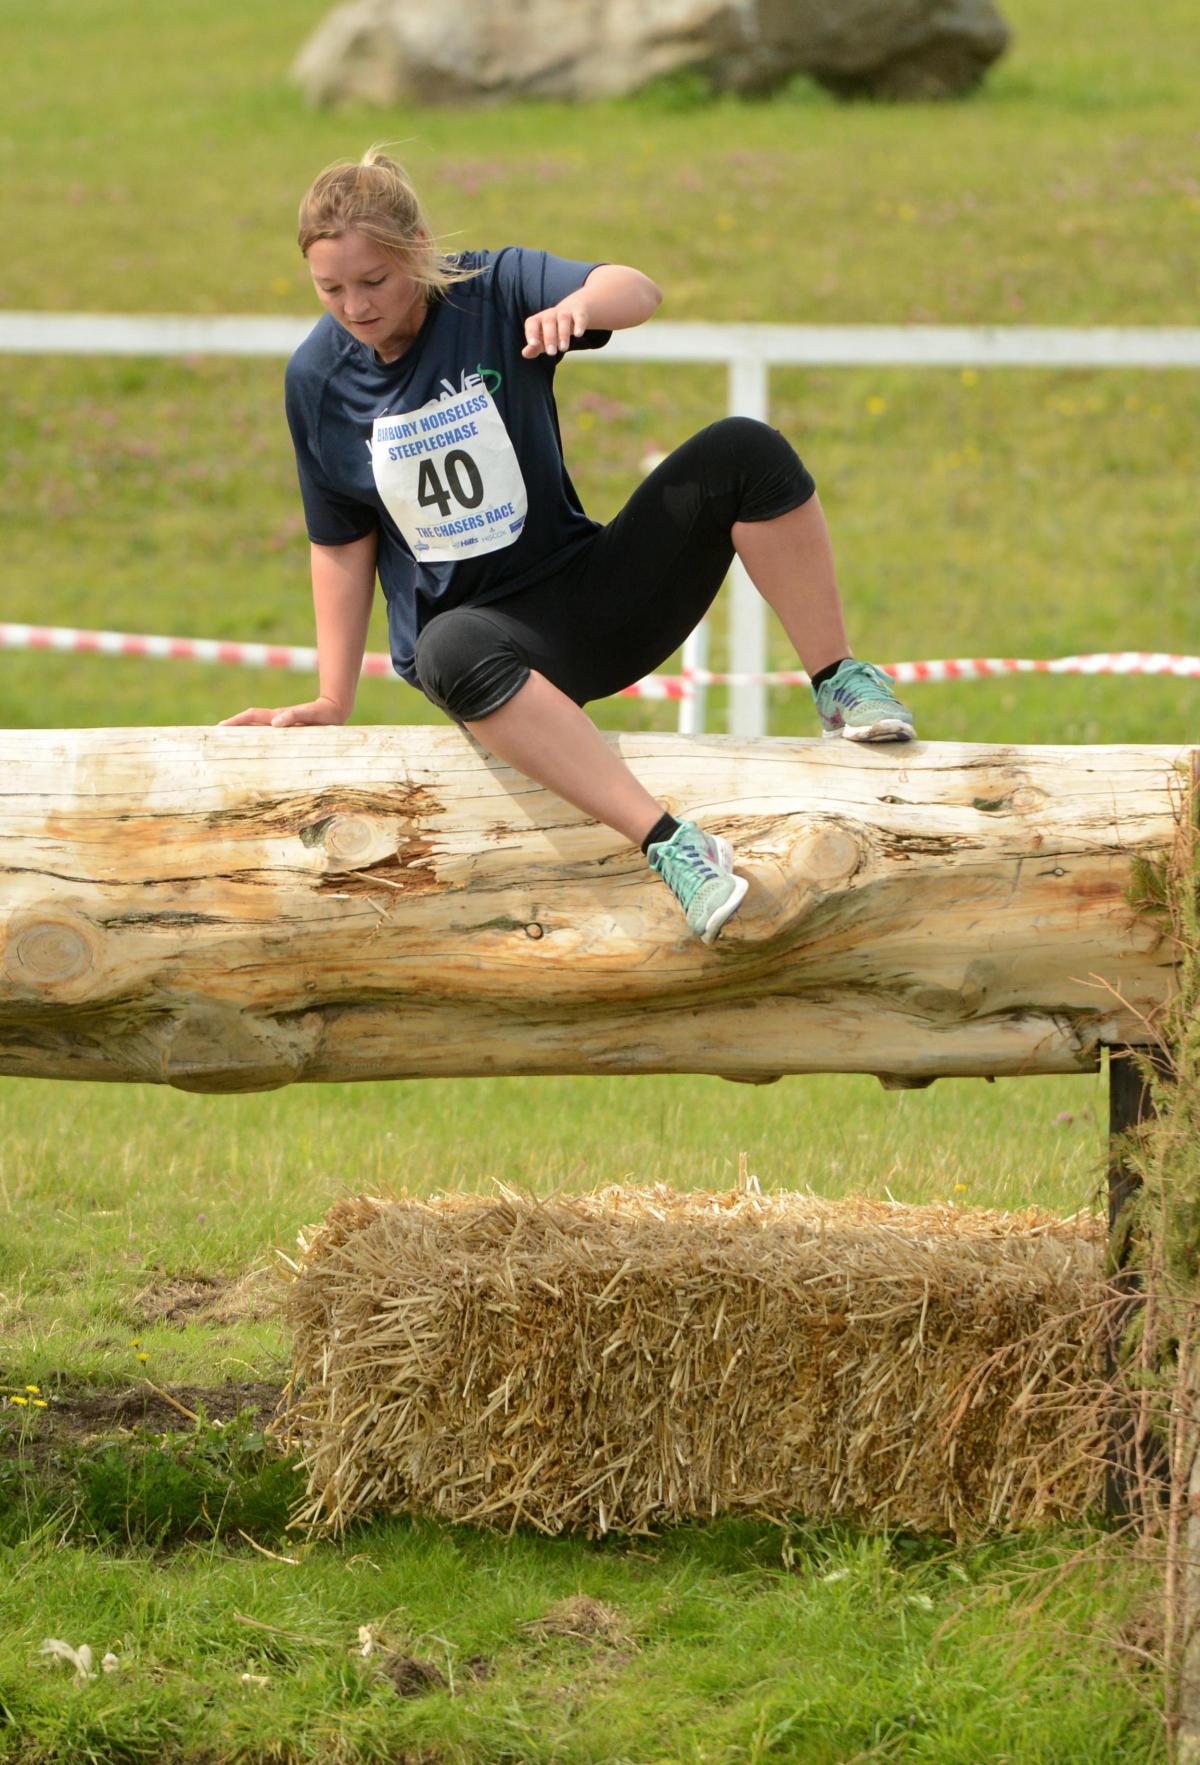 Action from the Horseless Steeplechase at Barbury captured by Clare Green